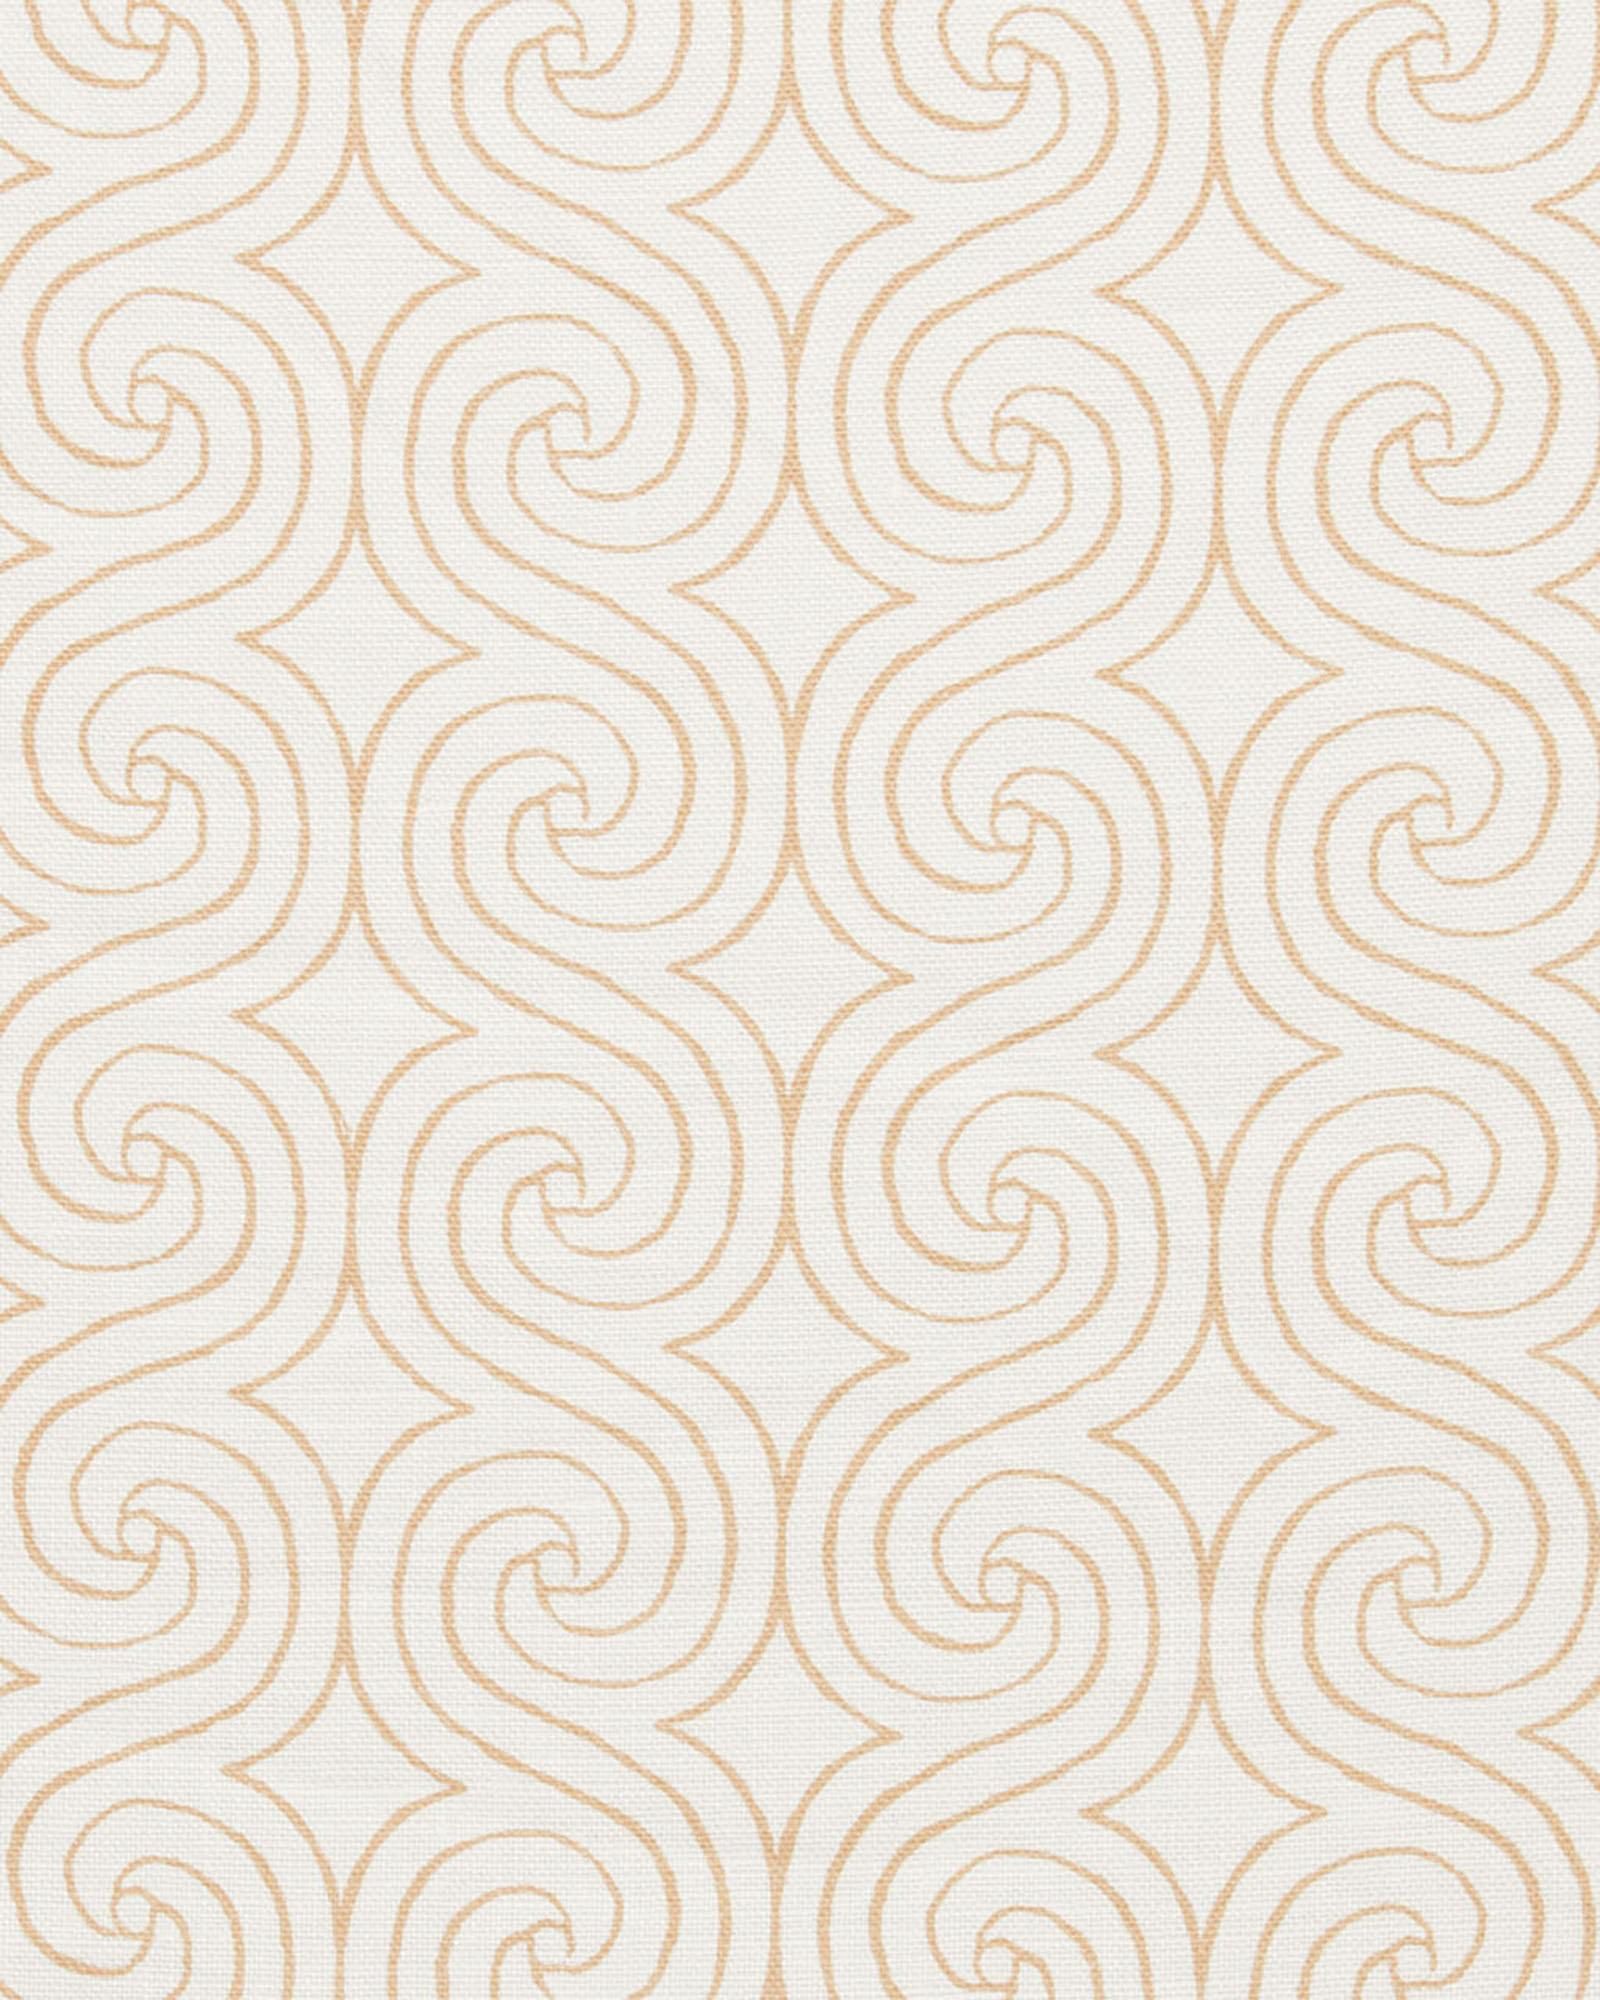 Fabric by the Yard - Swirl Linen | Serena and Lily